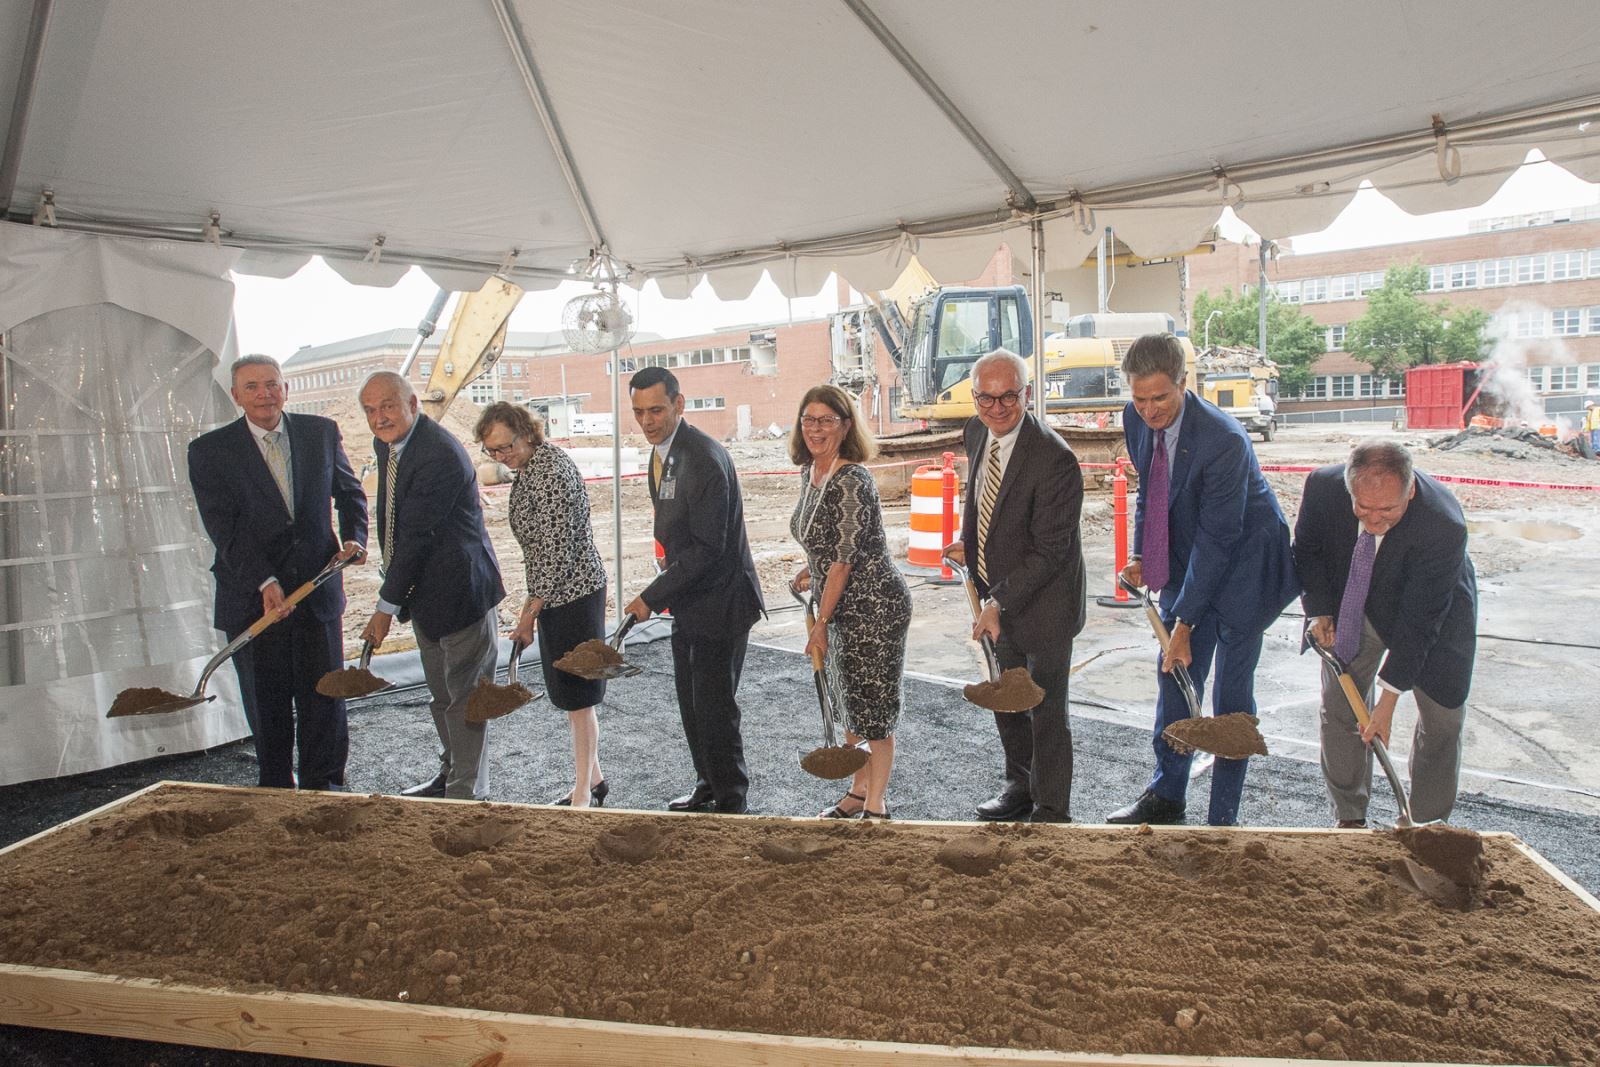 Groundbreaking of Adult Outpatient Facility, June 2018